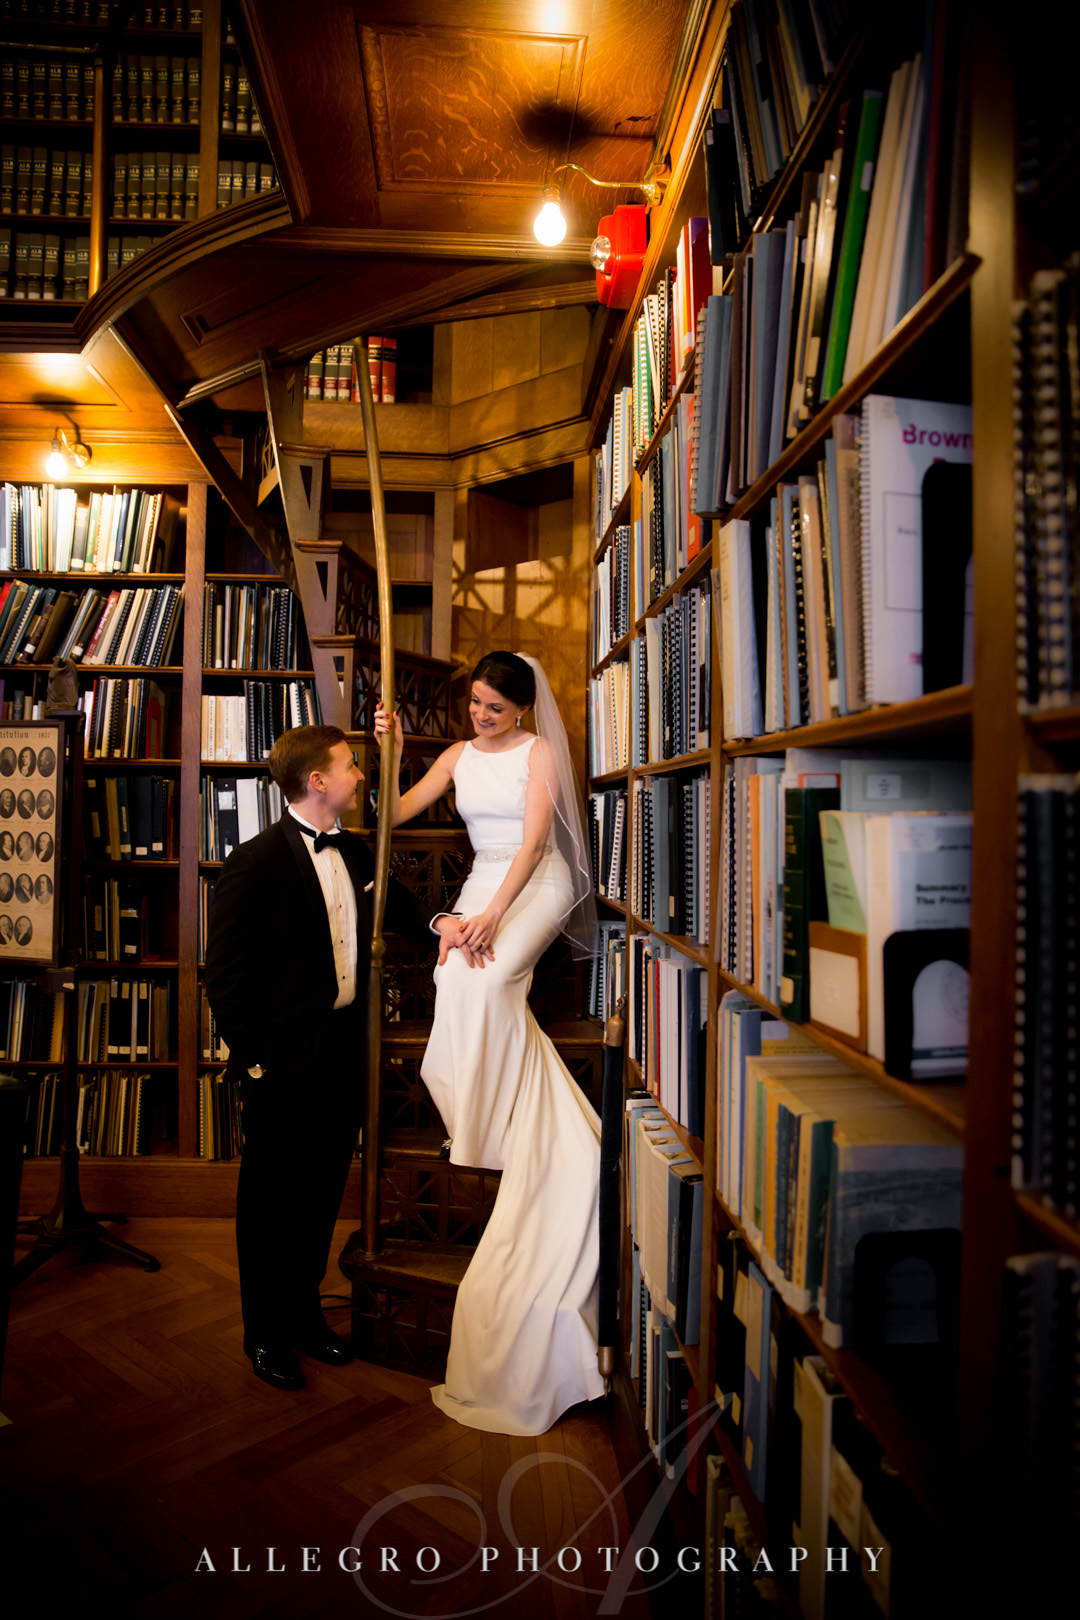 Bride and groom pose in library stacks of the rhode island state house, providence